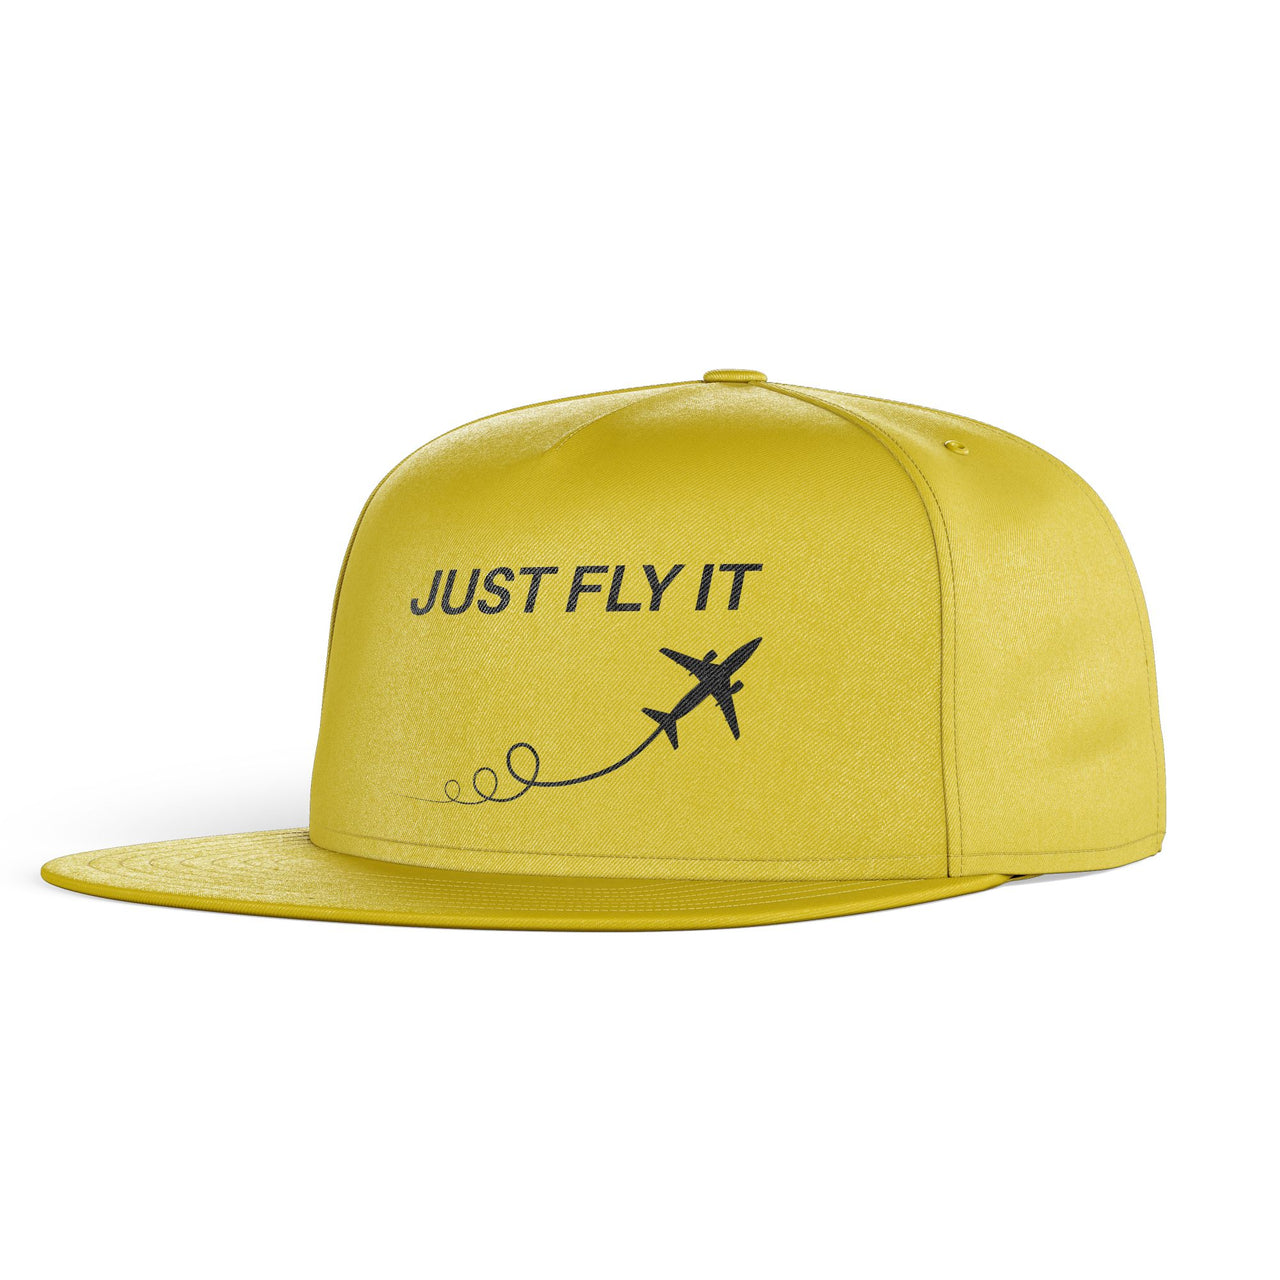 Just Fly It Designed Snapback Caps & Hats